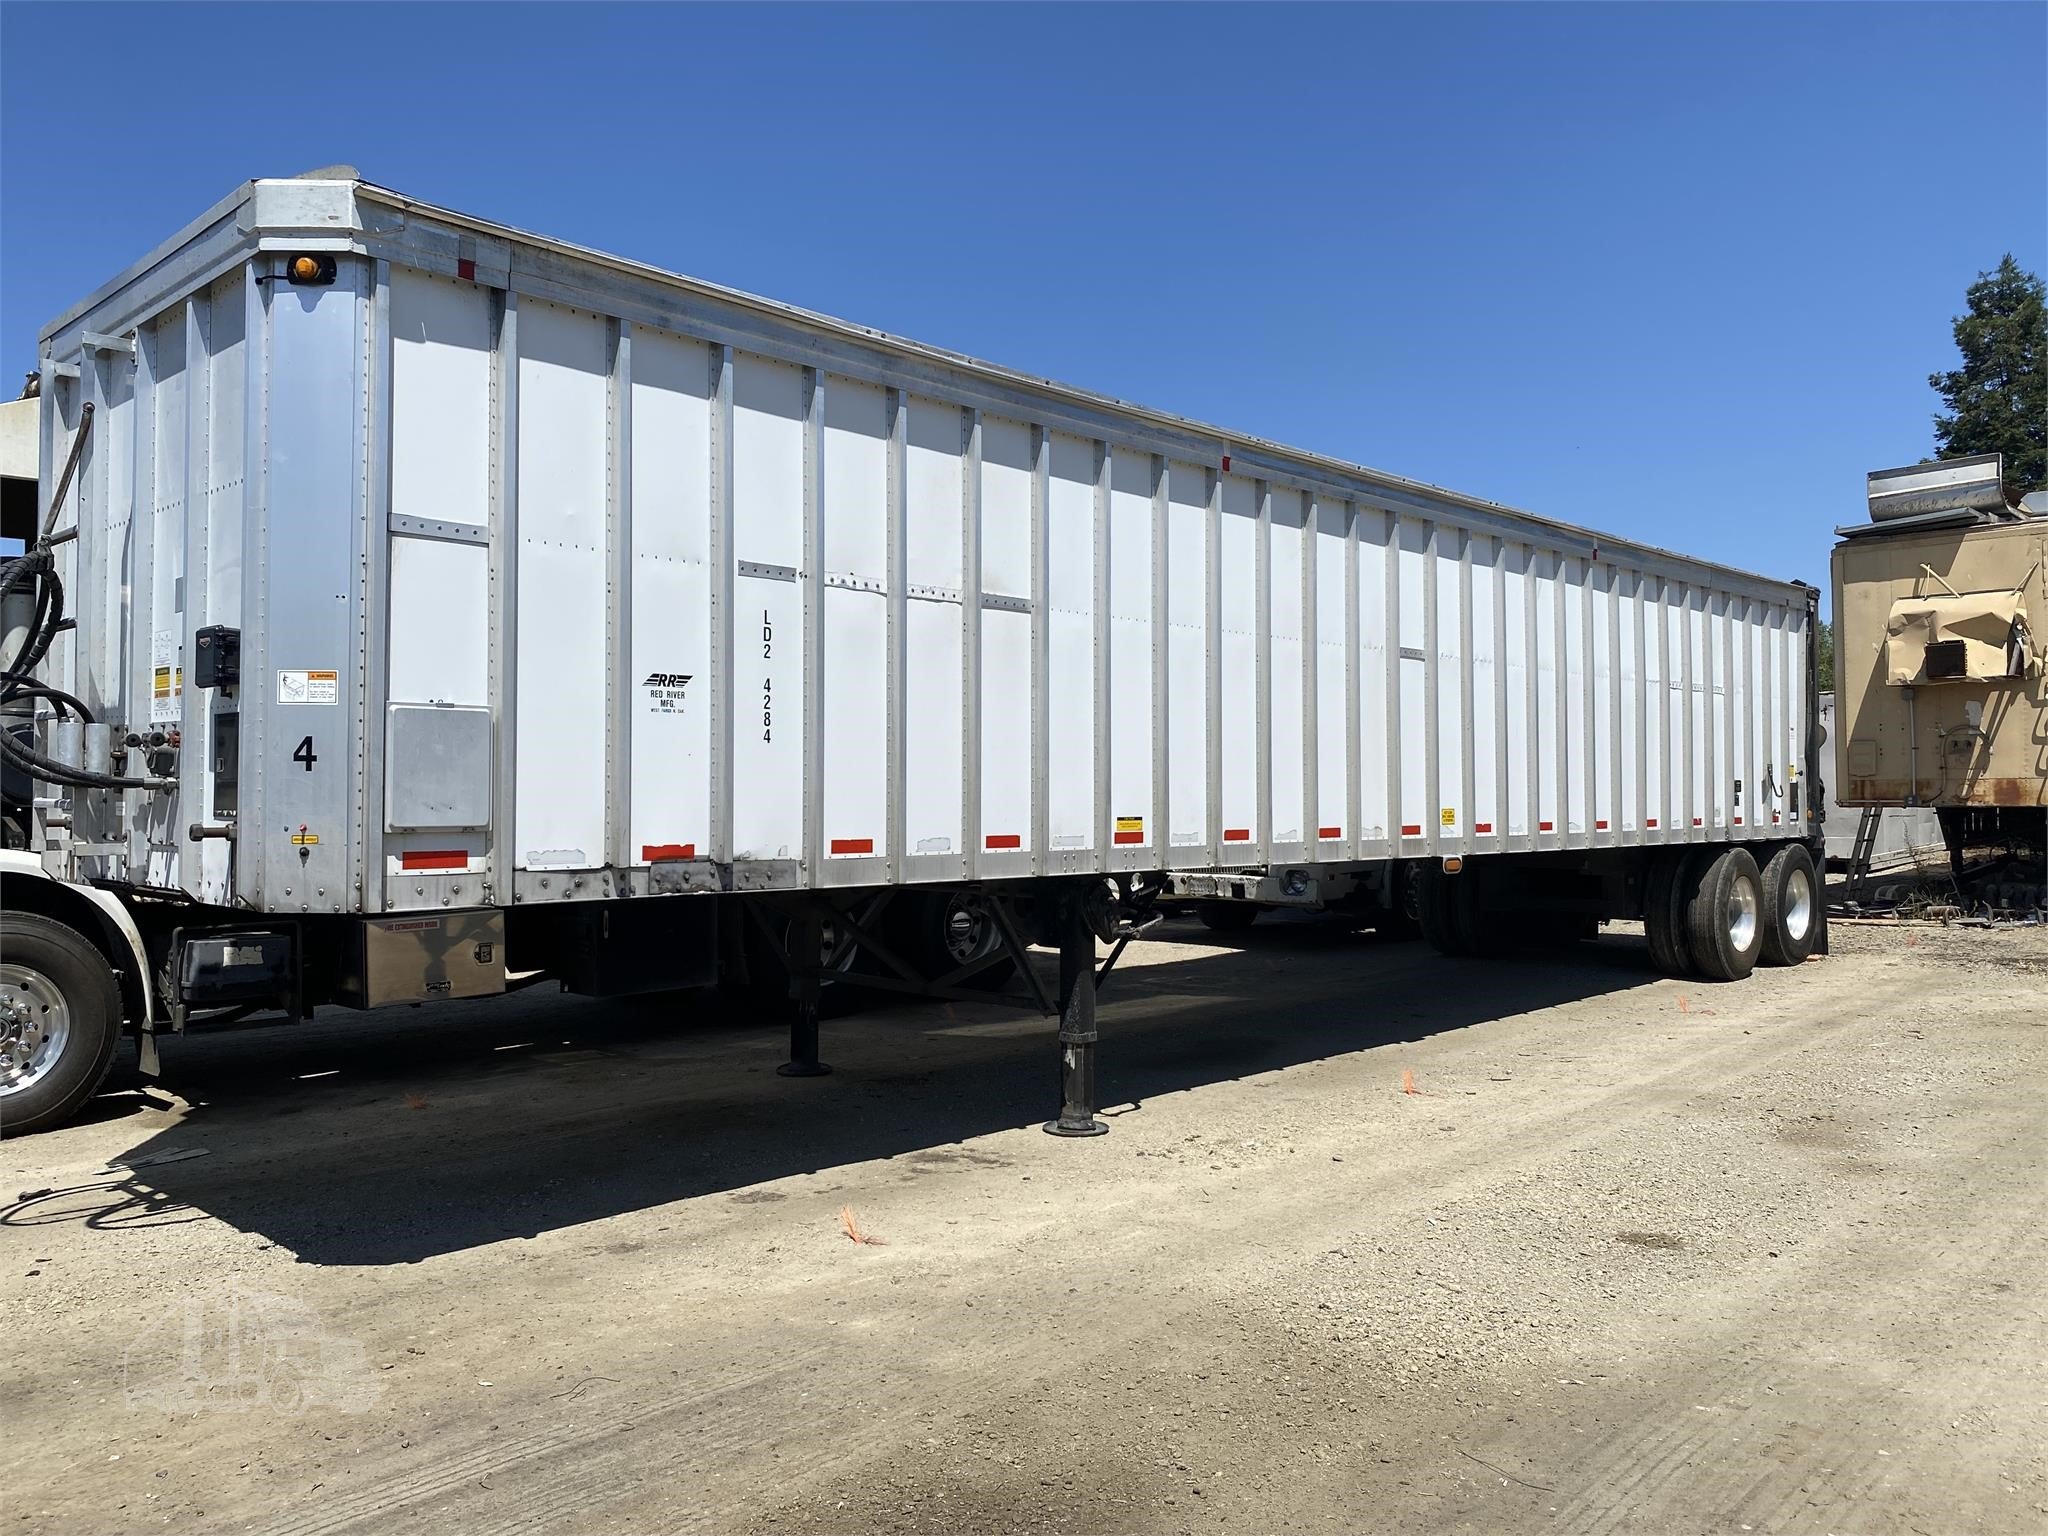 Belt Trailers For Sale By THE TRAILER CO INC - 2 Listings | www